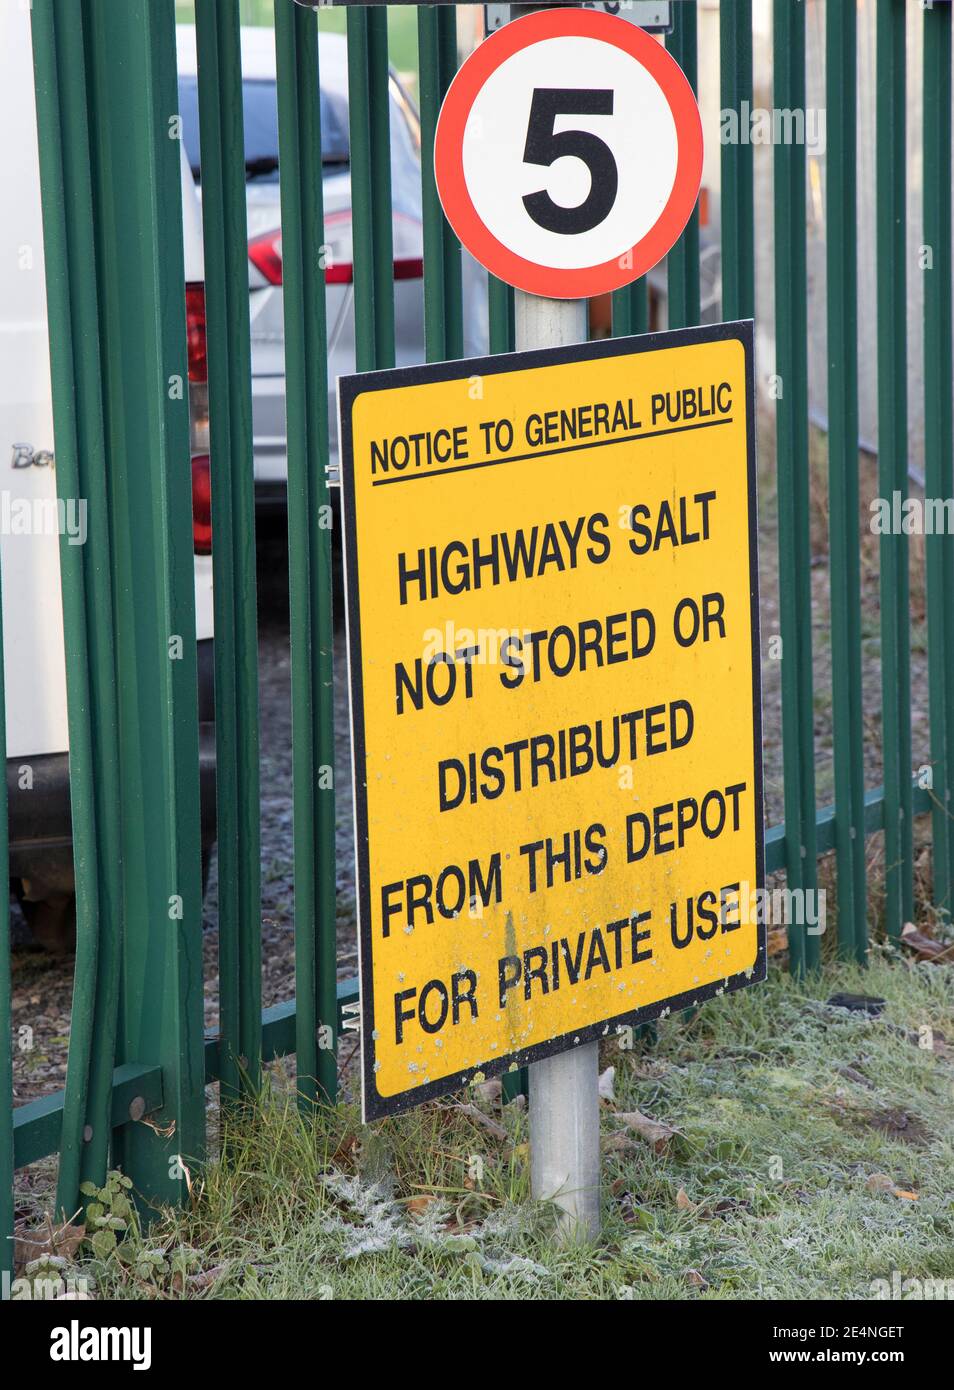 Notice warning public that highways salt is not stored or distributed from depot, Abergavenny, Wales, UK Stock Photo